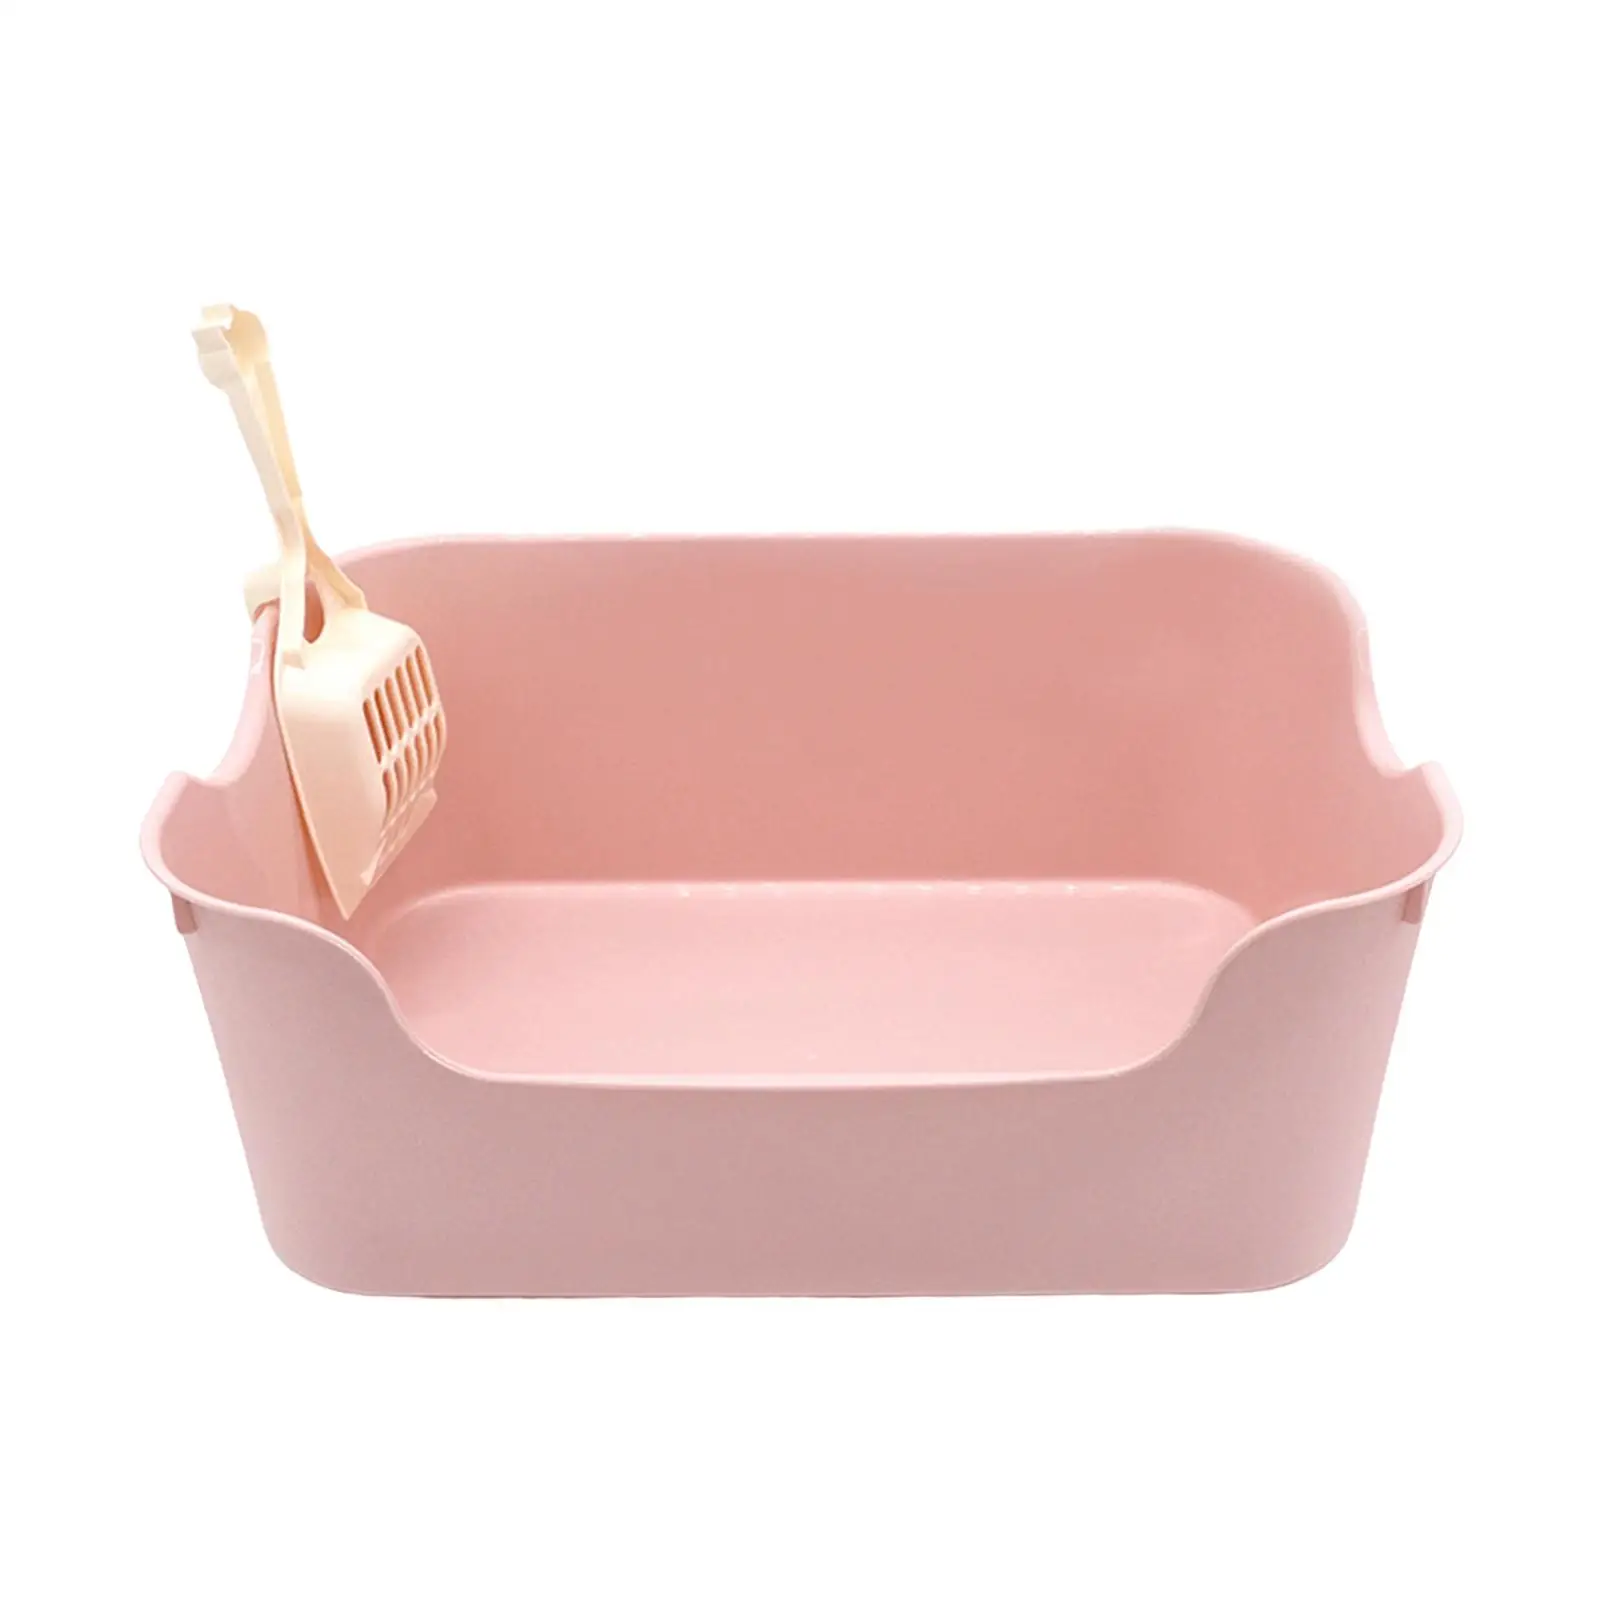 Cat Cat Toilet Bedpan Pet Supplies for Small Medium Large Cats Anti Splashing Durable Kitty Litter Pan Cat Sand Box Container